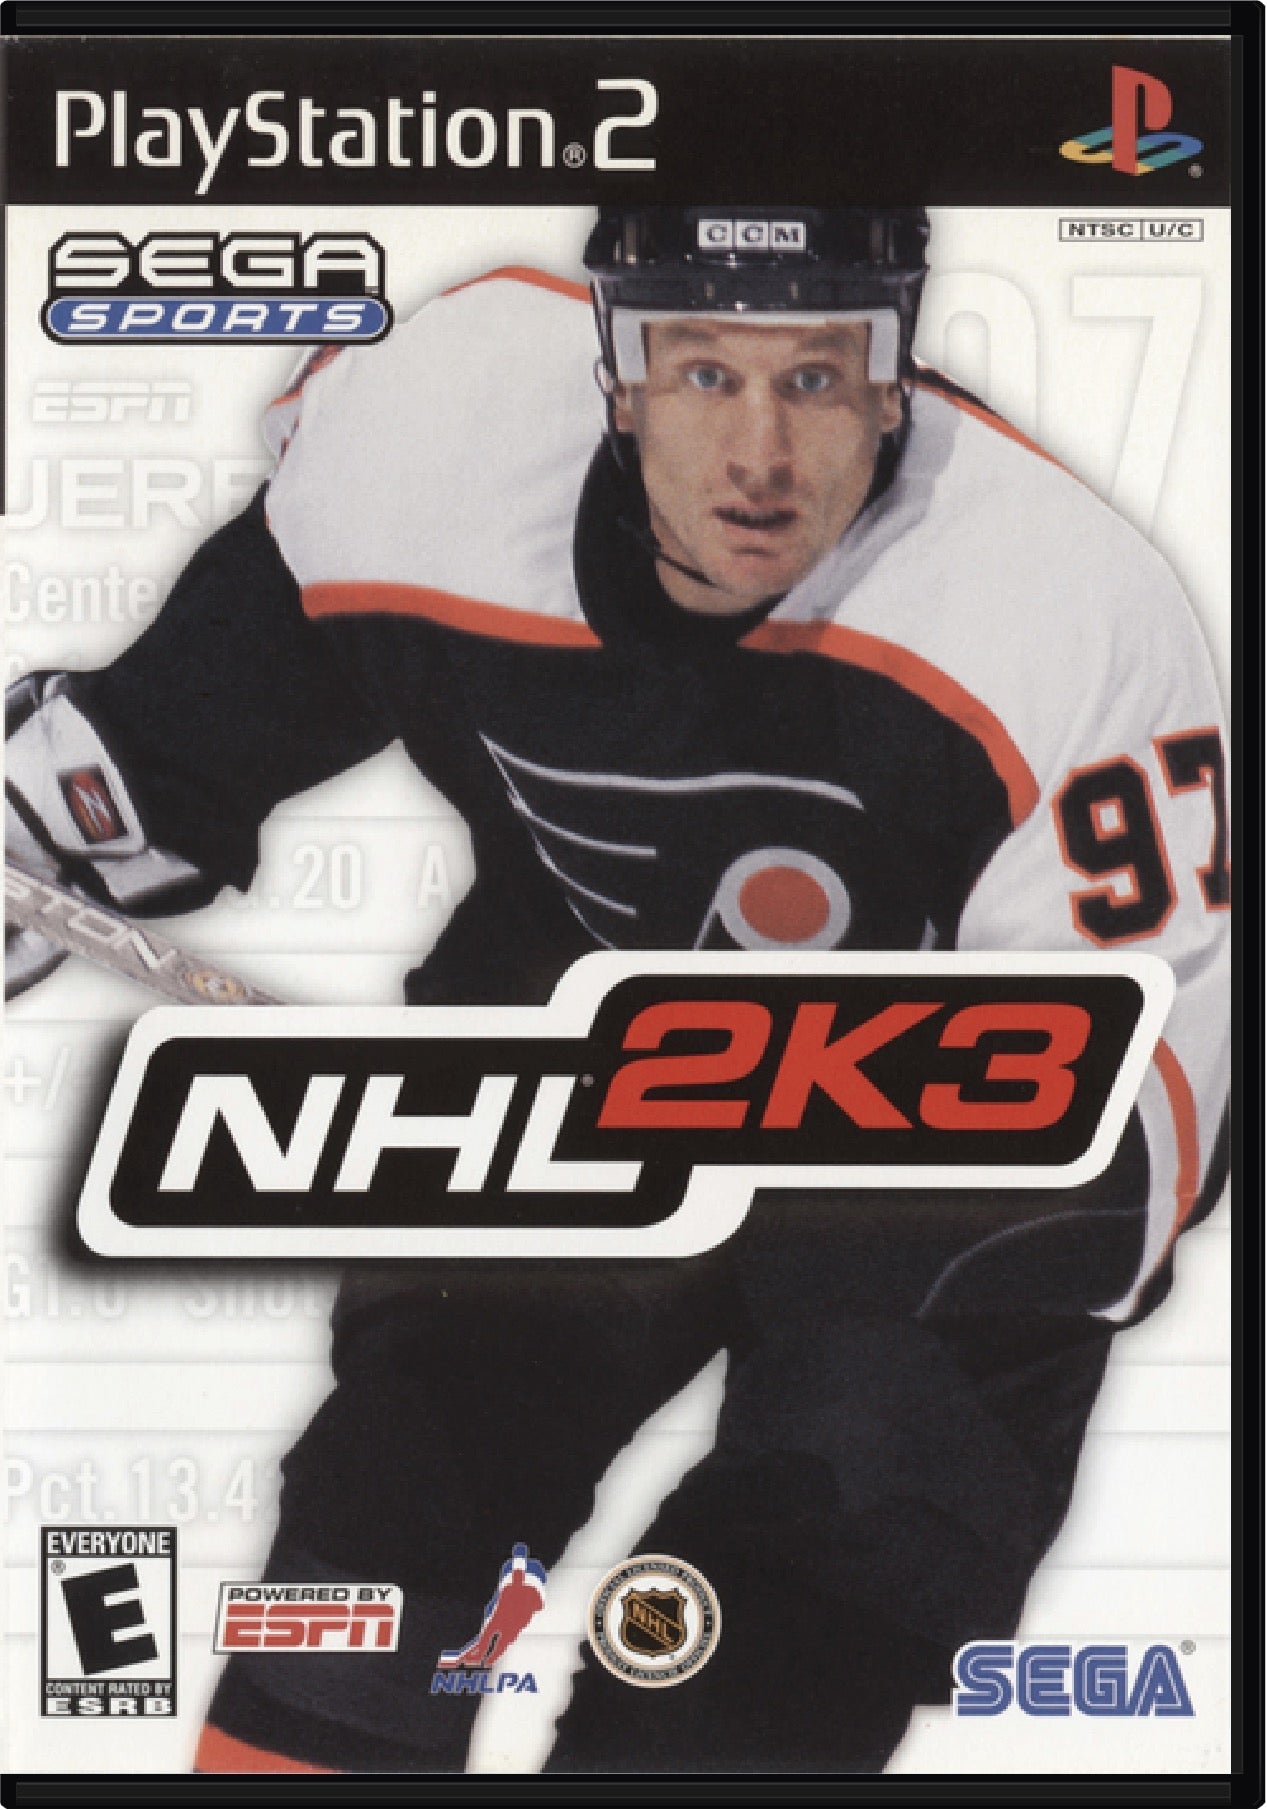 NHL 2K3 Cover Art and Product Photo